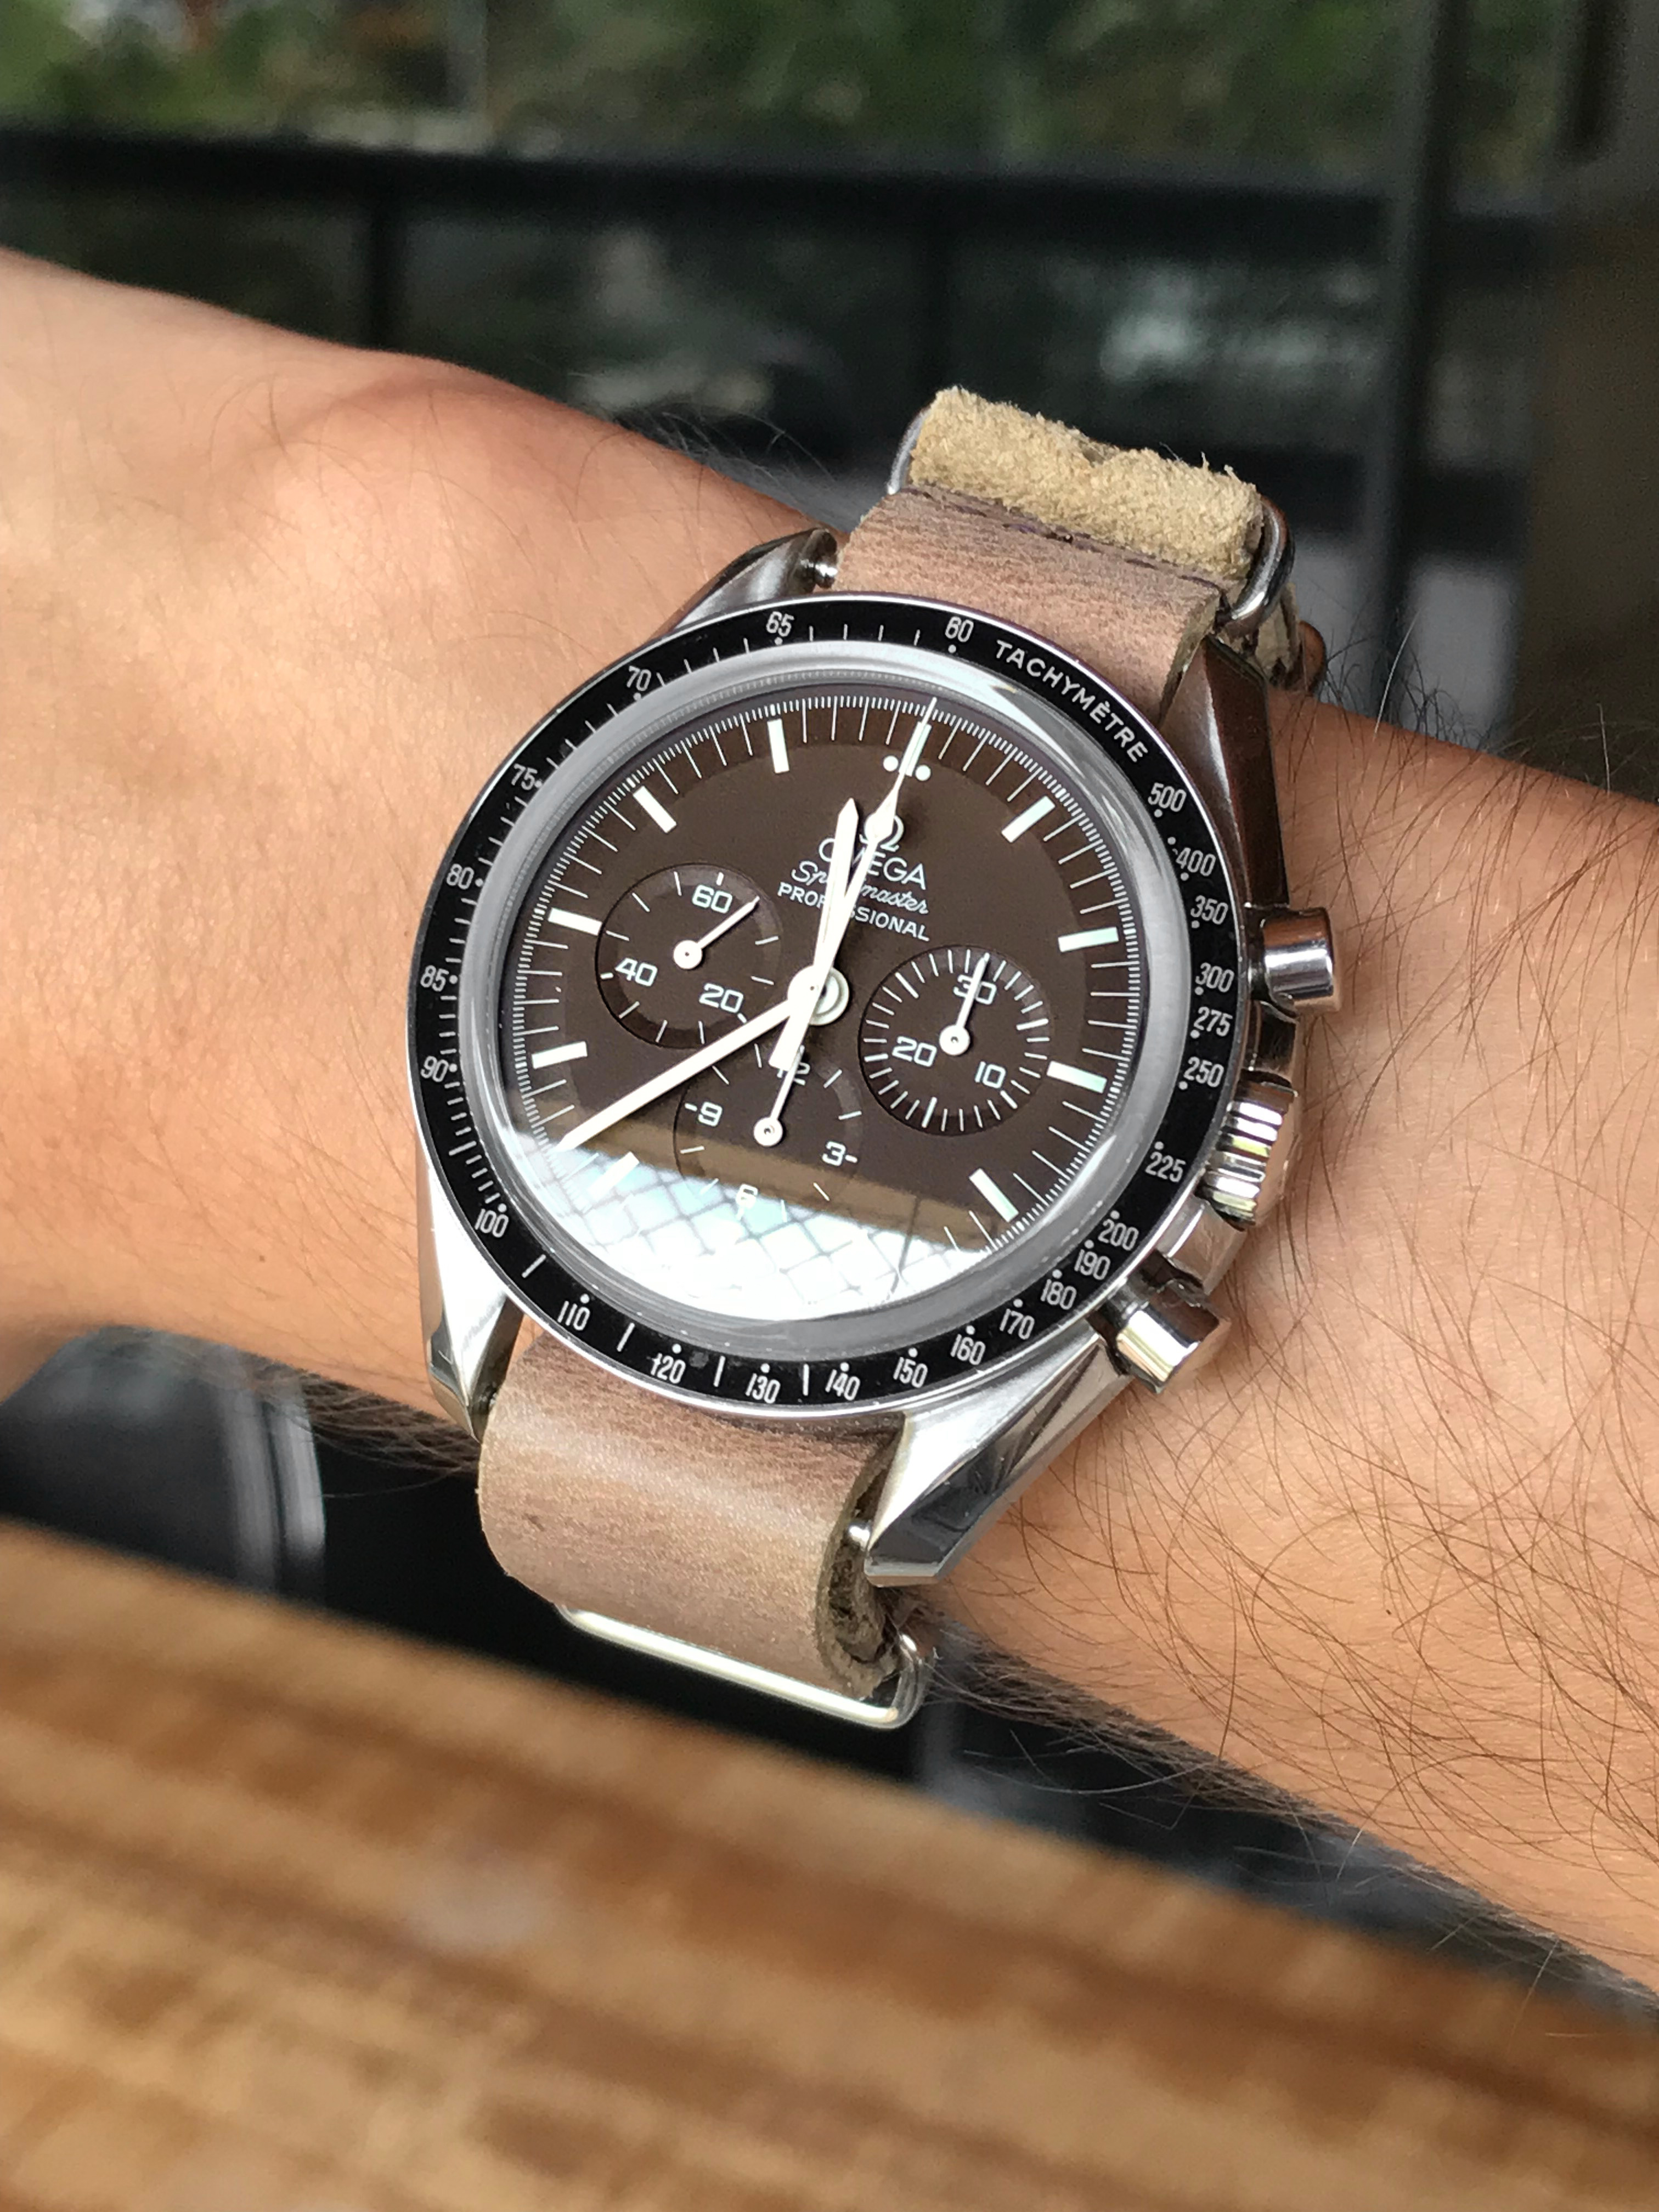 Thoughts on speedmaster professional 